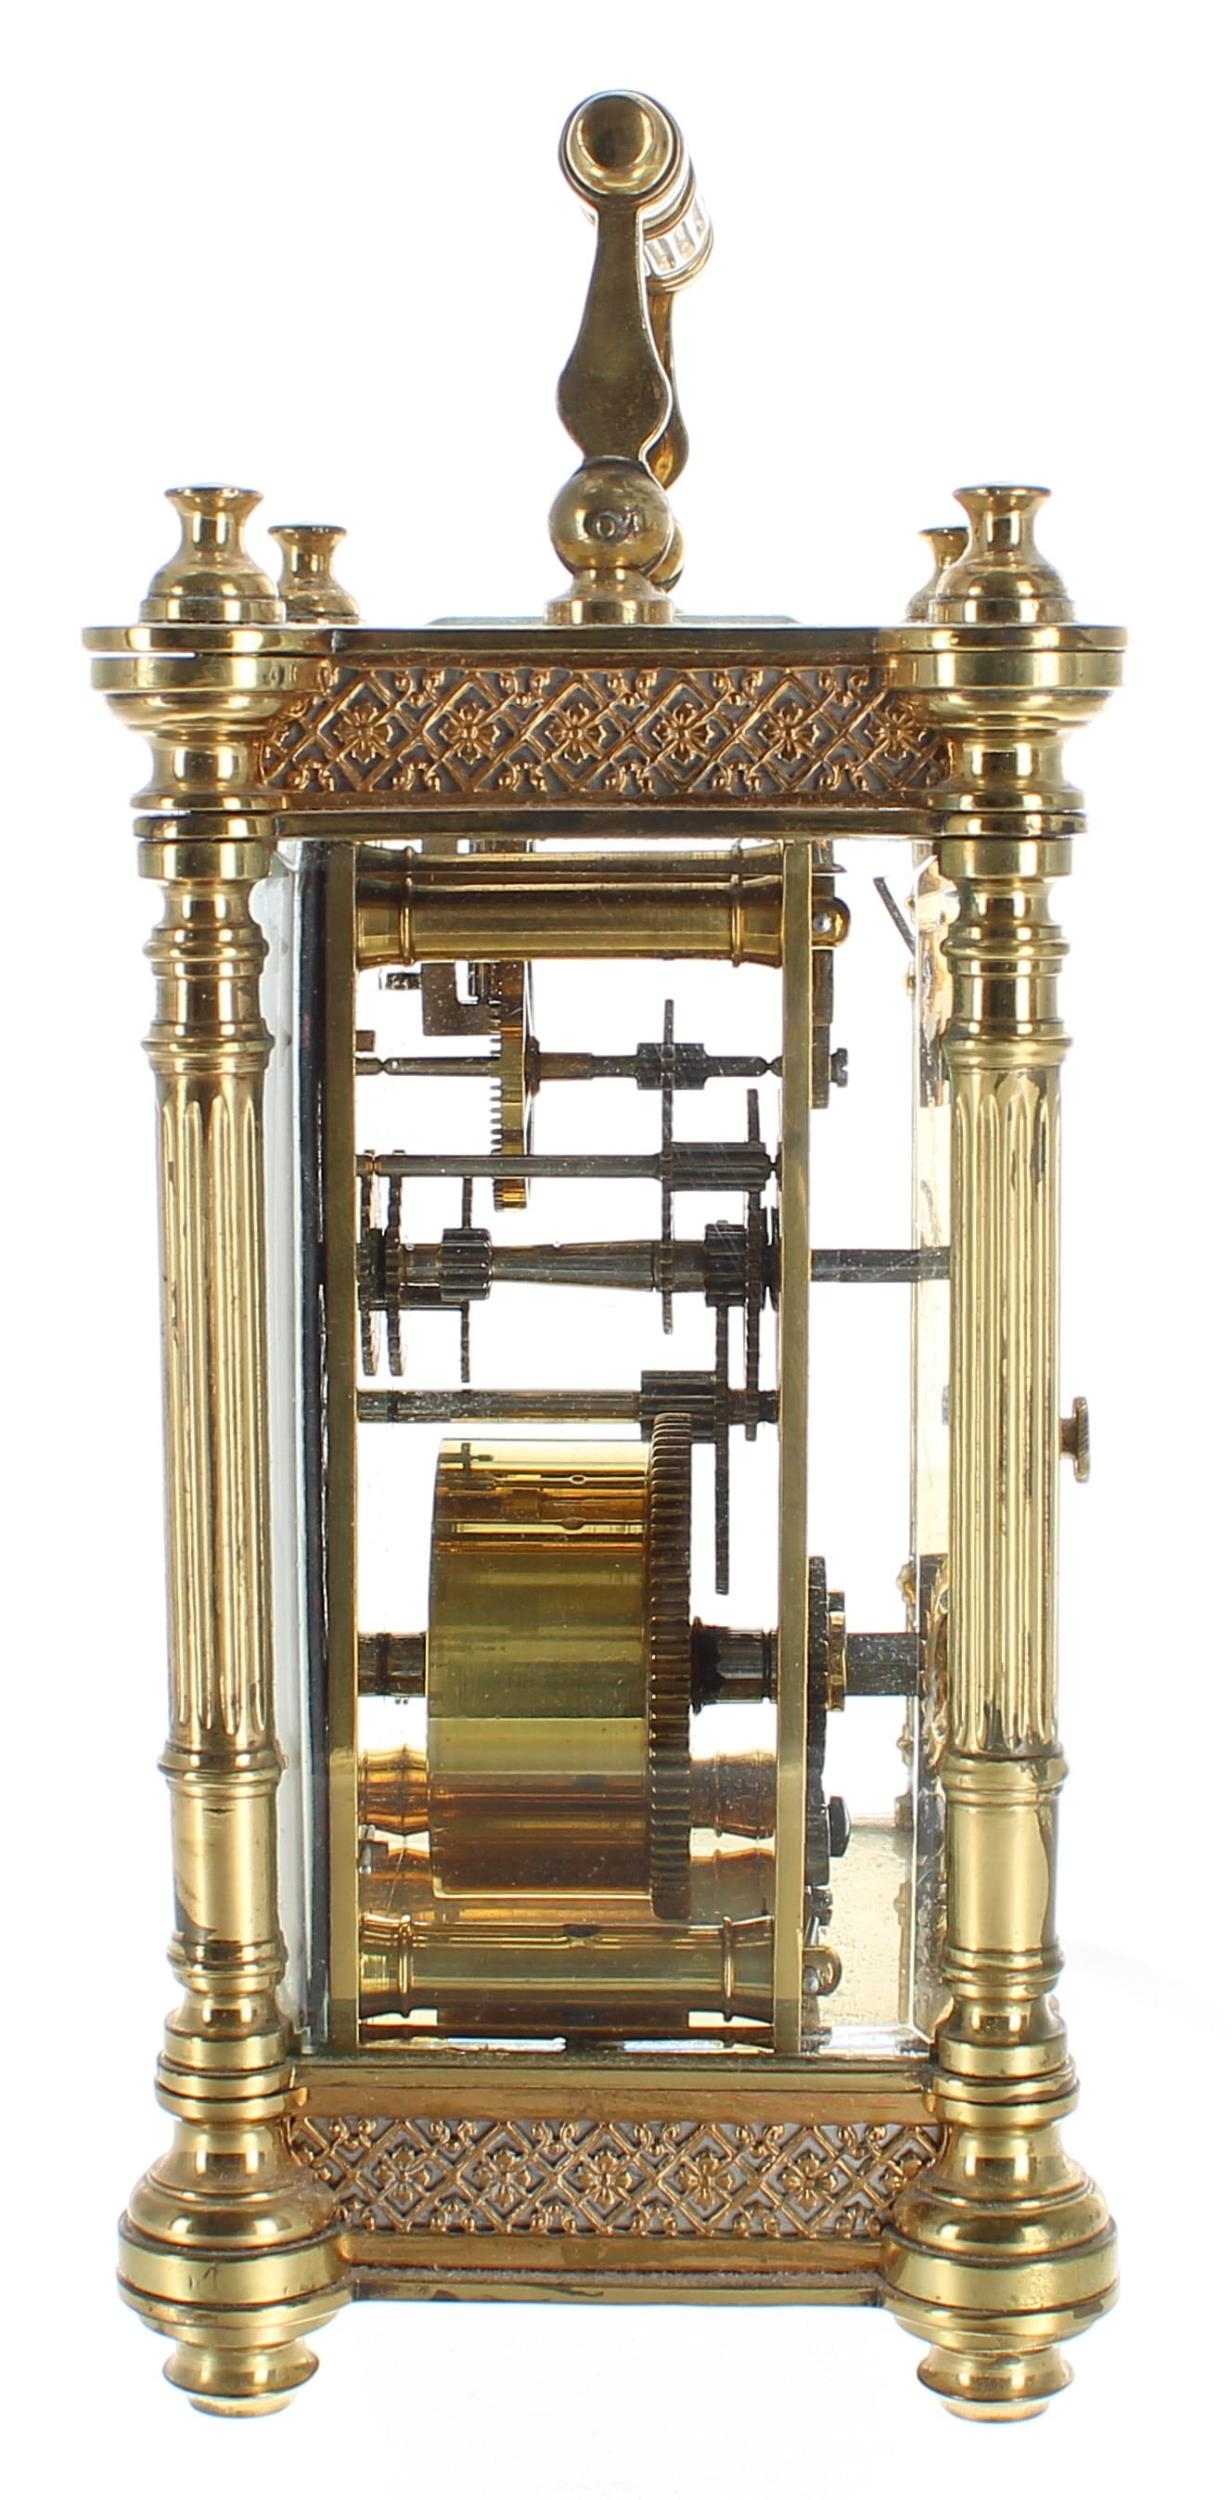 Carriage clock timepiece, within a fancy filigree banded and pillared case, 6.25" high (key) - Image 3 of 4